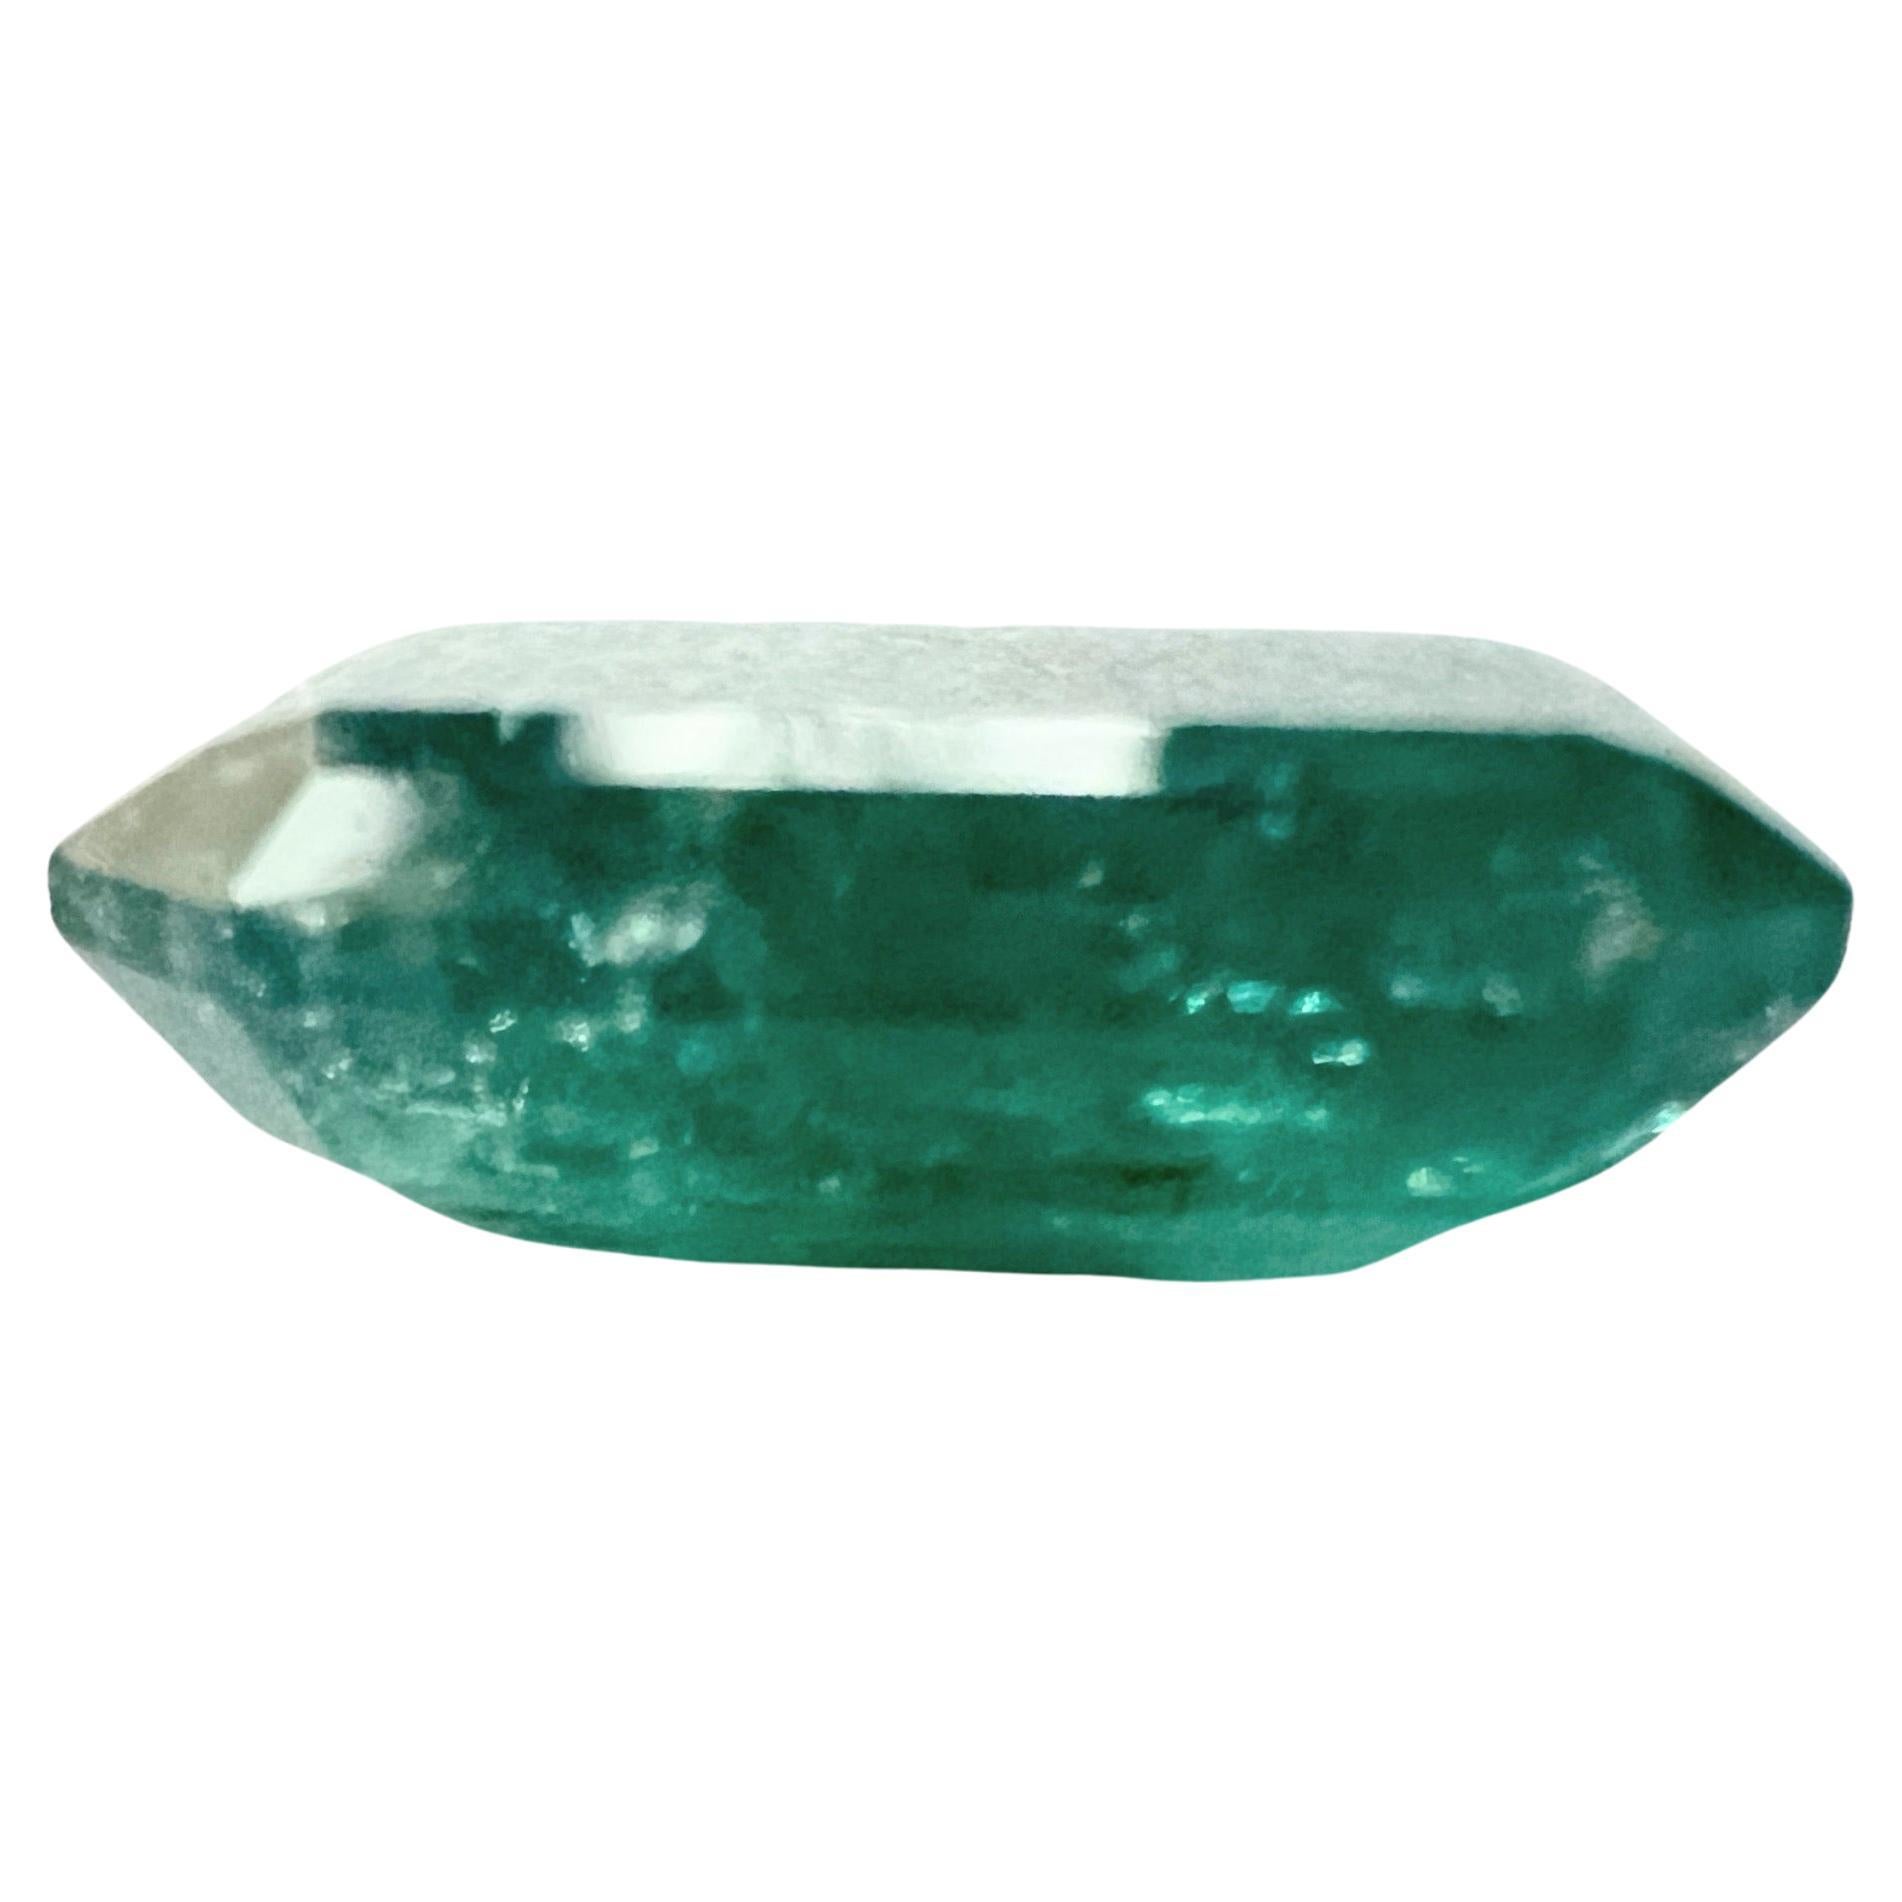 Behold this 7.90ct Non-Oil Natural Green Emerald Gemstone, a true work of nature's artistry. This gem boasts not only amazing clarity but also features artistic and masterful inclusions, adding a unique and captivating dimension to its